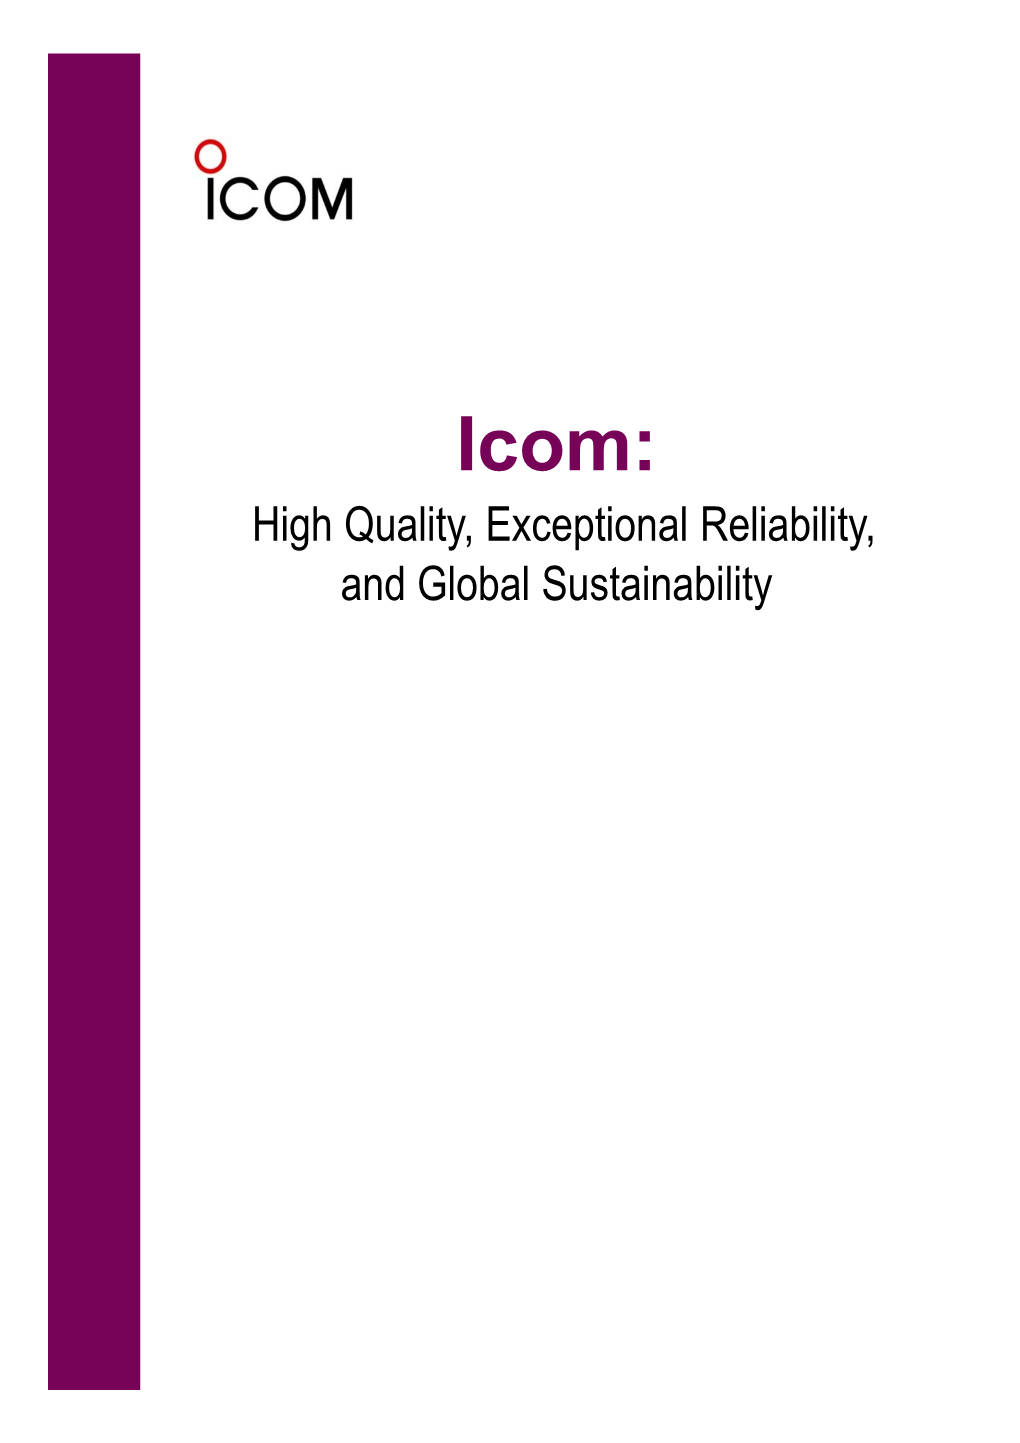 Read About Icom's Commitment to Providing Excellent Quality And